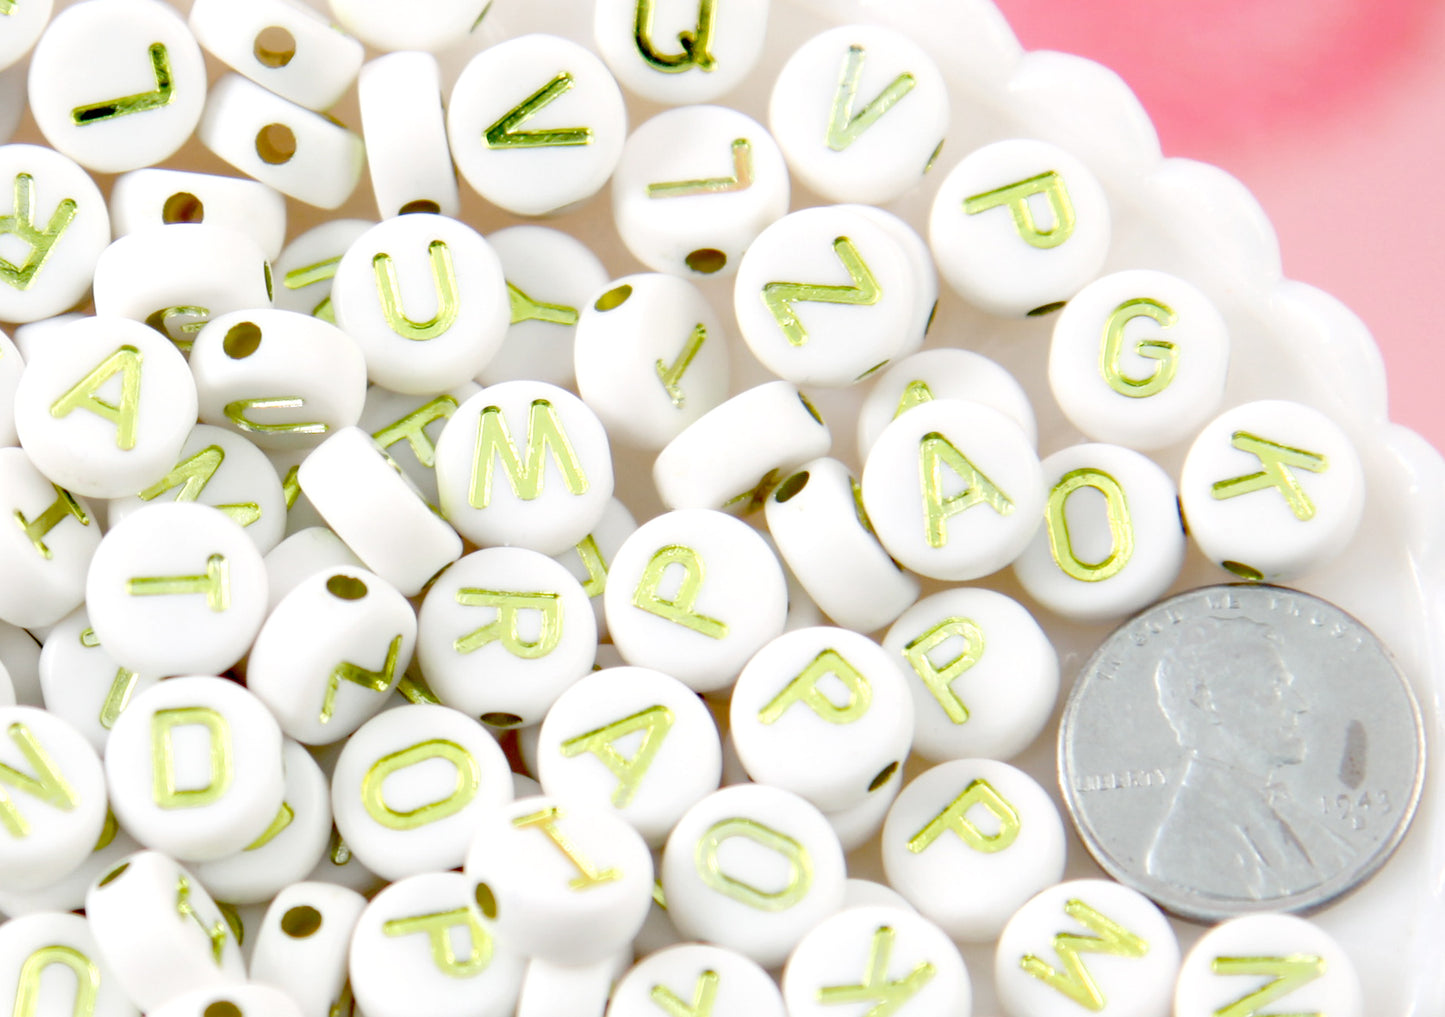 Big Letter Beads - 10mm Large Round Gold and White Alphabet Acrylic or Resin Beads - 170 pc set